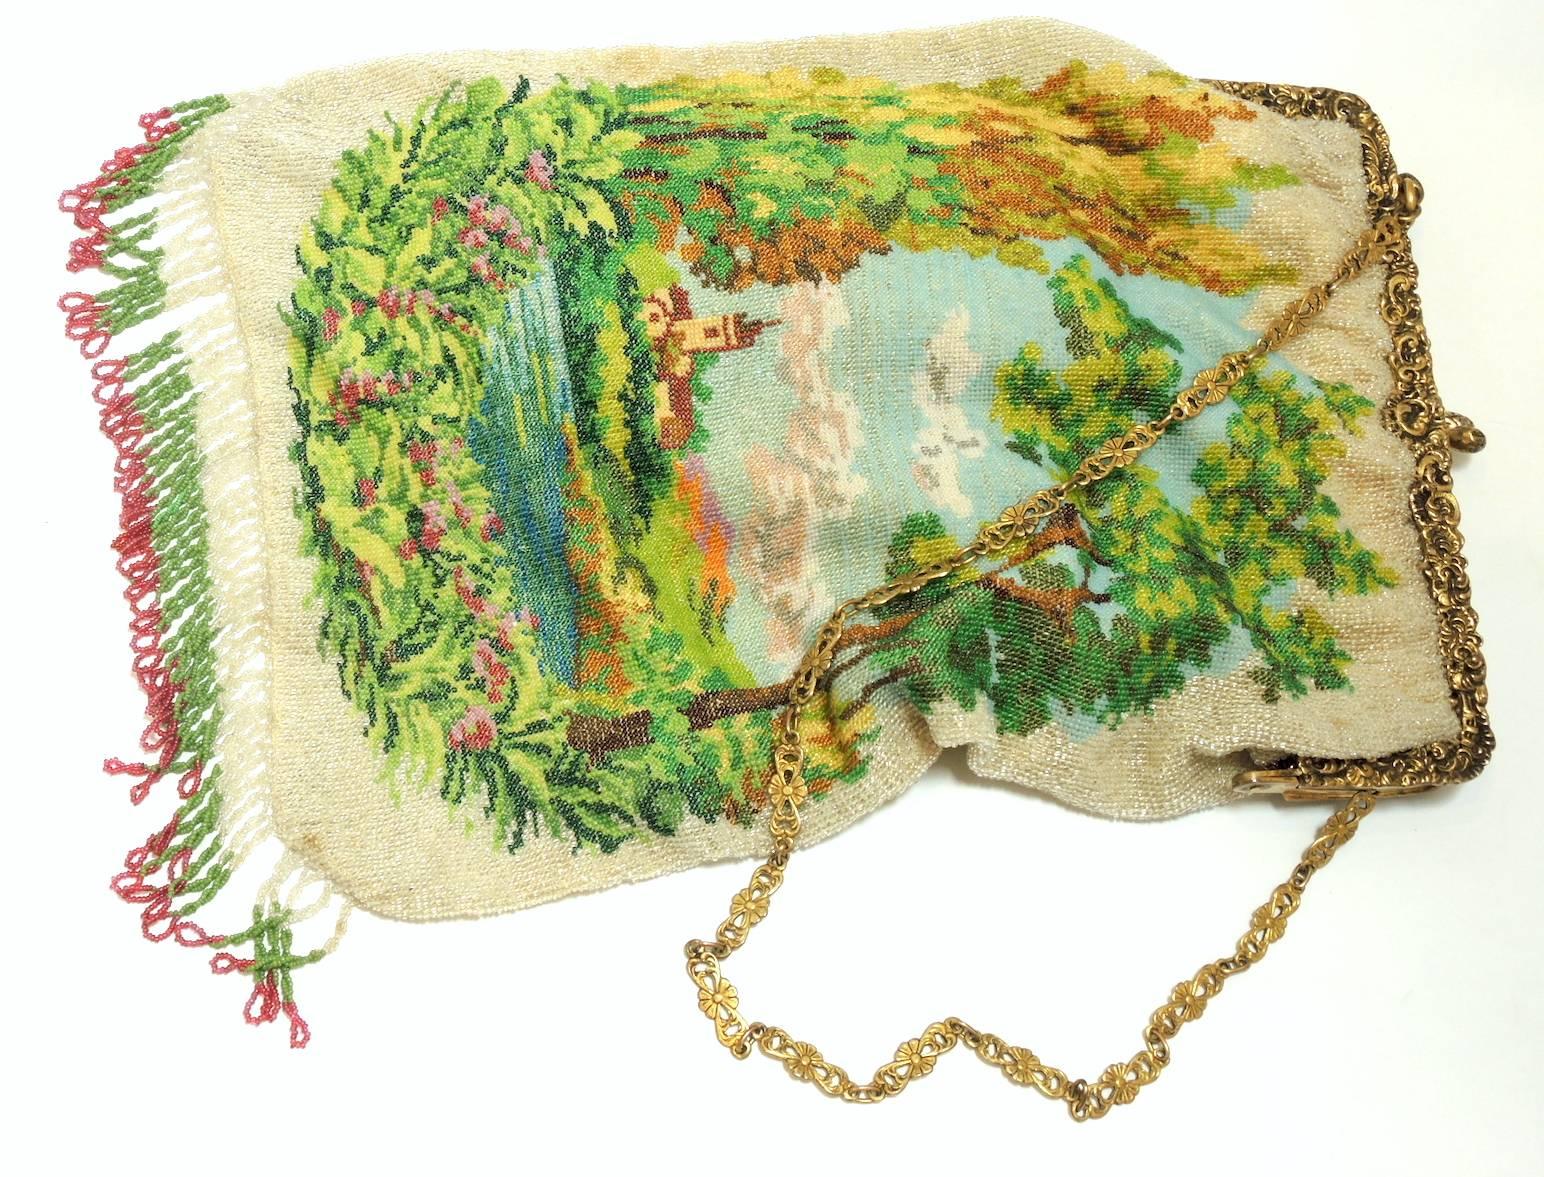 The scene of the dreamy castle nestled next to a lake with surrounding trees is beautifully designed.  This bag is in mint condition and is rather large compared to the standard pieces we seen in the past. It measures 11” x “7 wide and all the beads